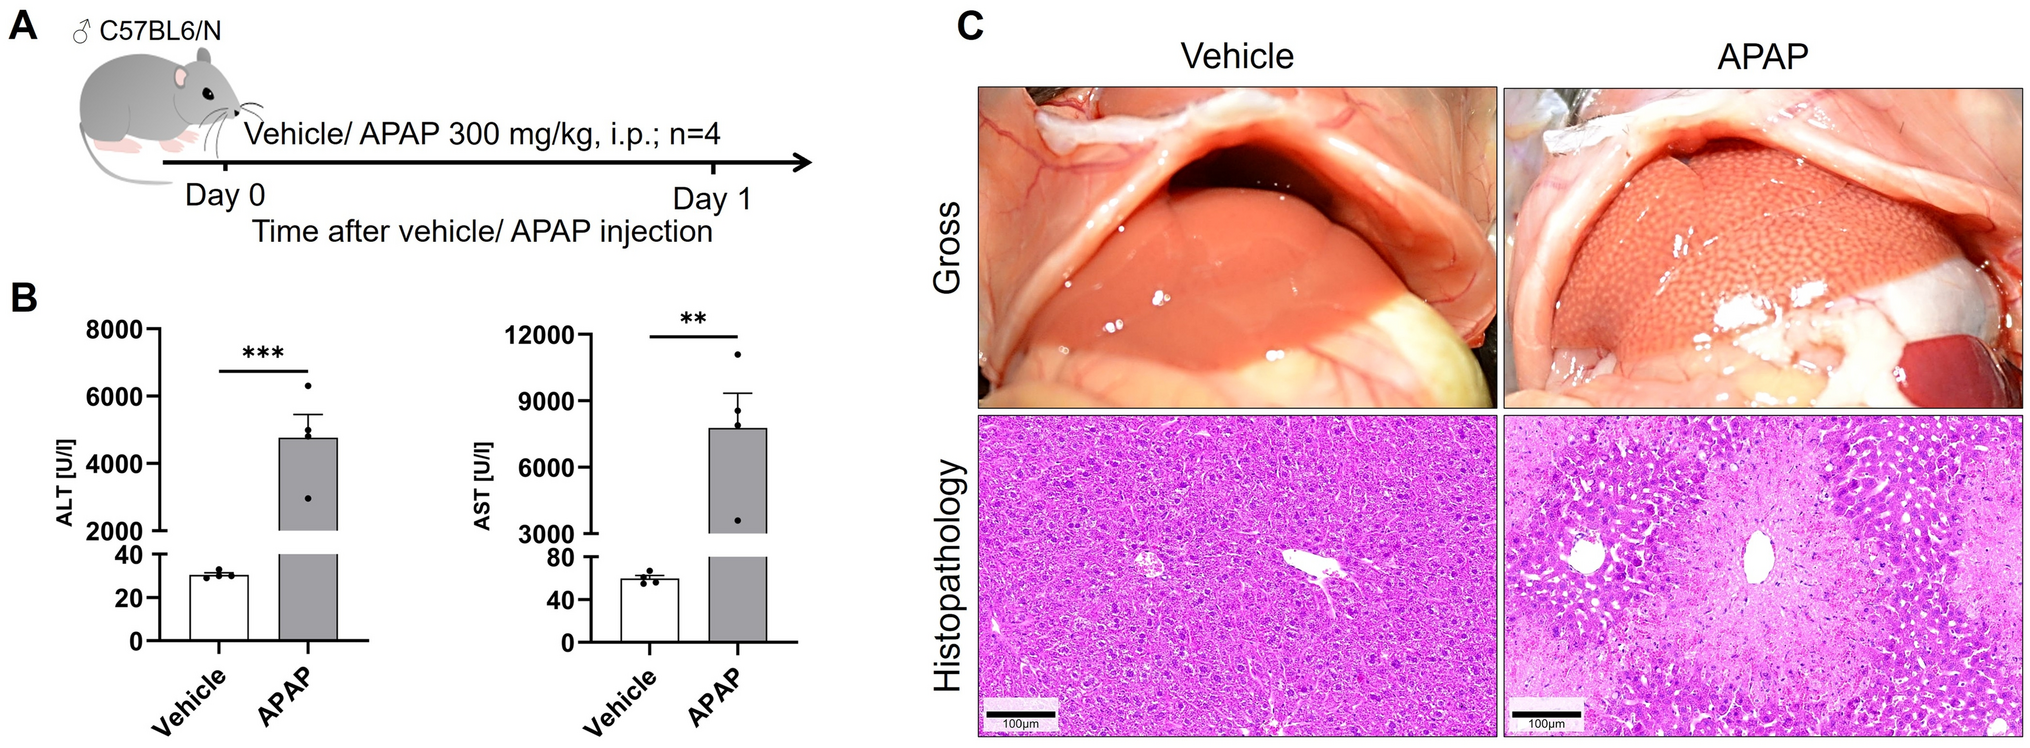 Acetaminophen overdose causes a breach of the blood–bile barrier in mice but not in rats